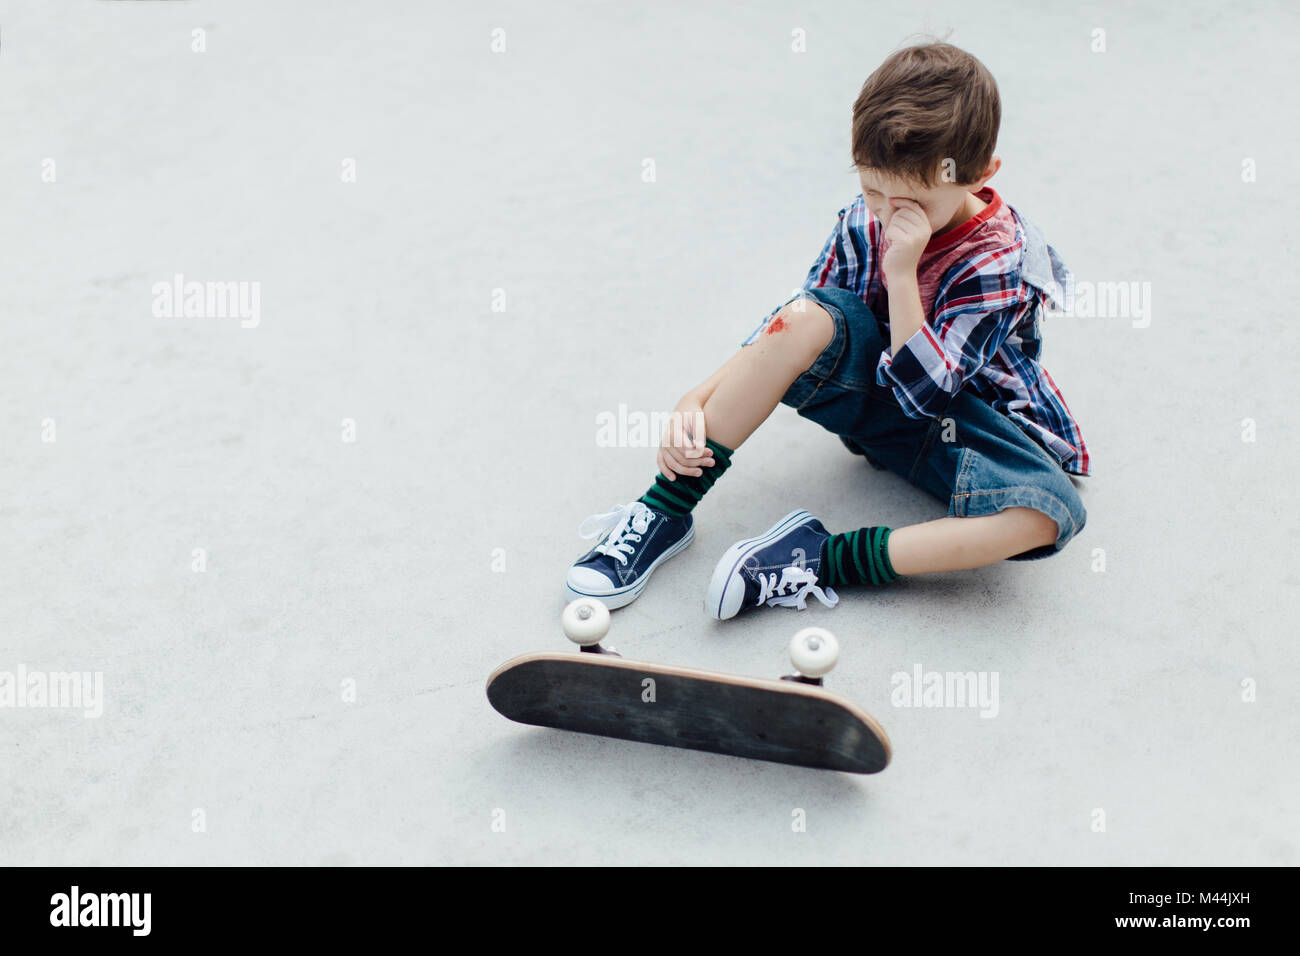 Portrait of an upset young skater boy sitting on a floor in pain Stock Photo